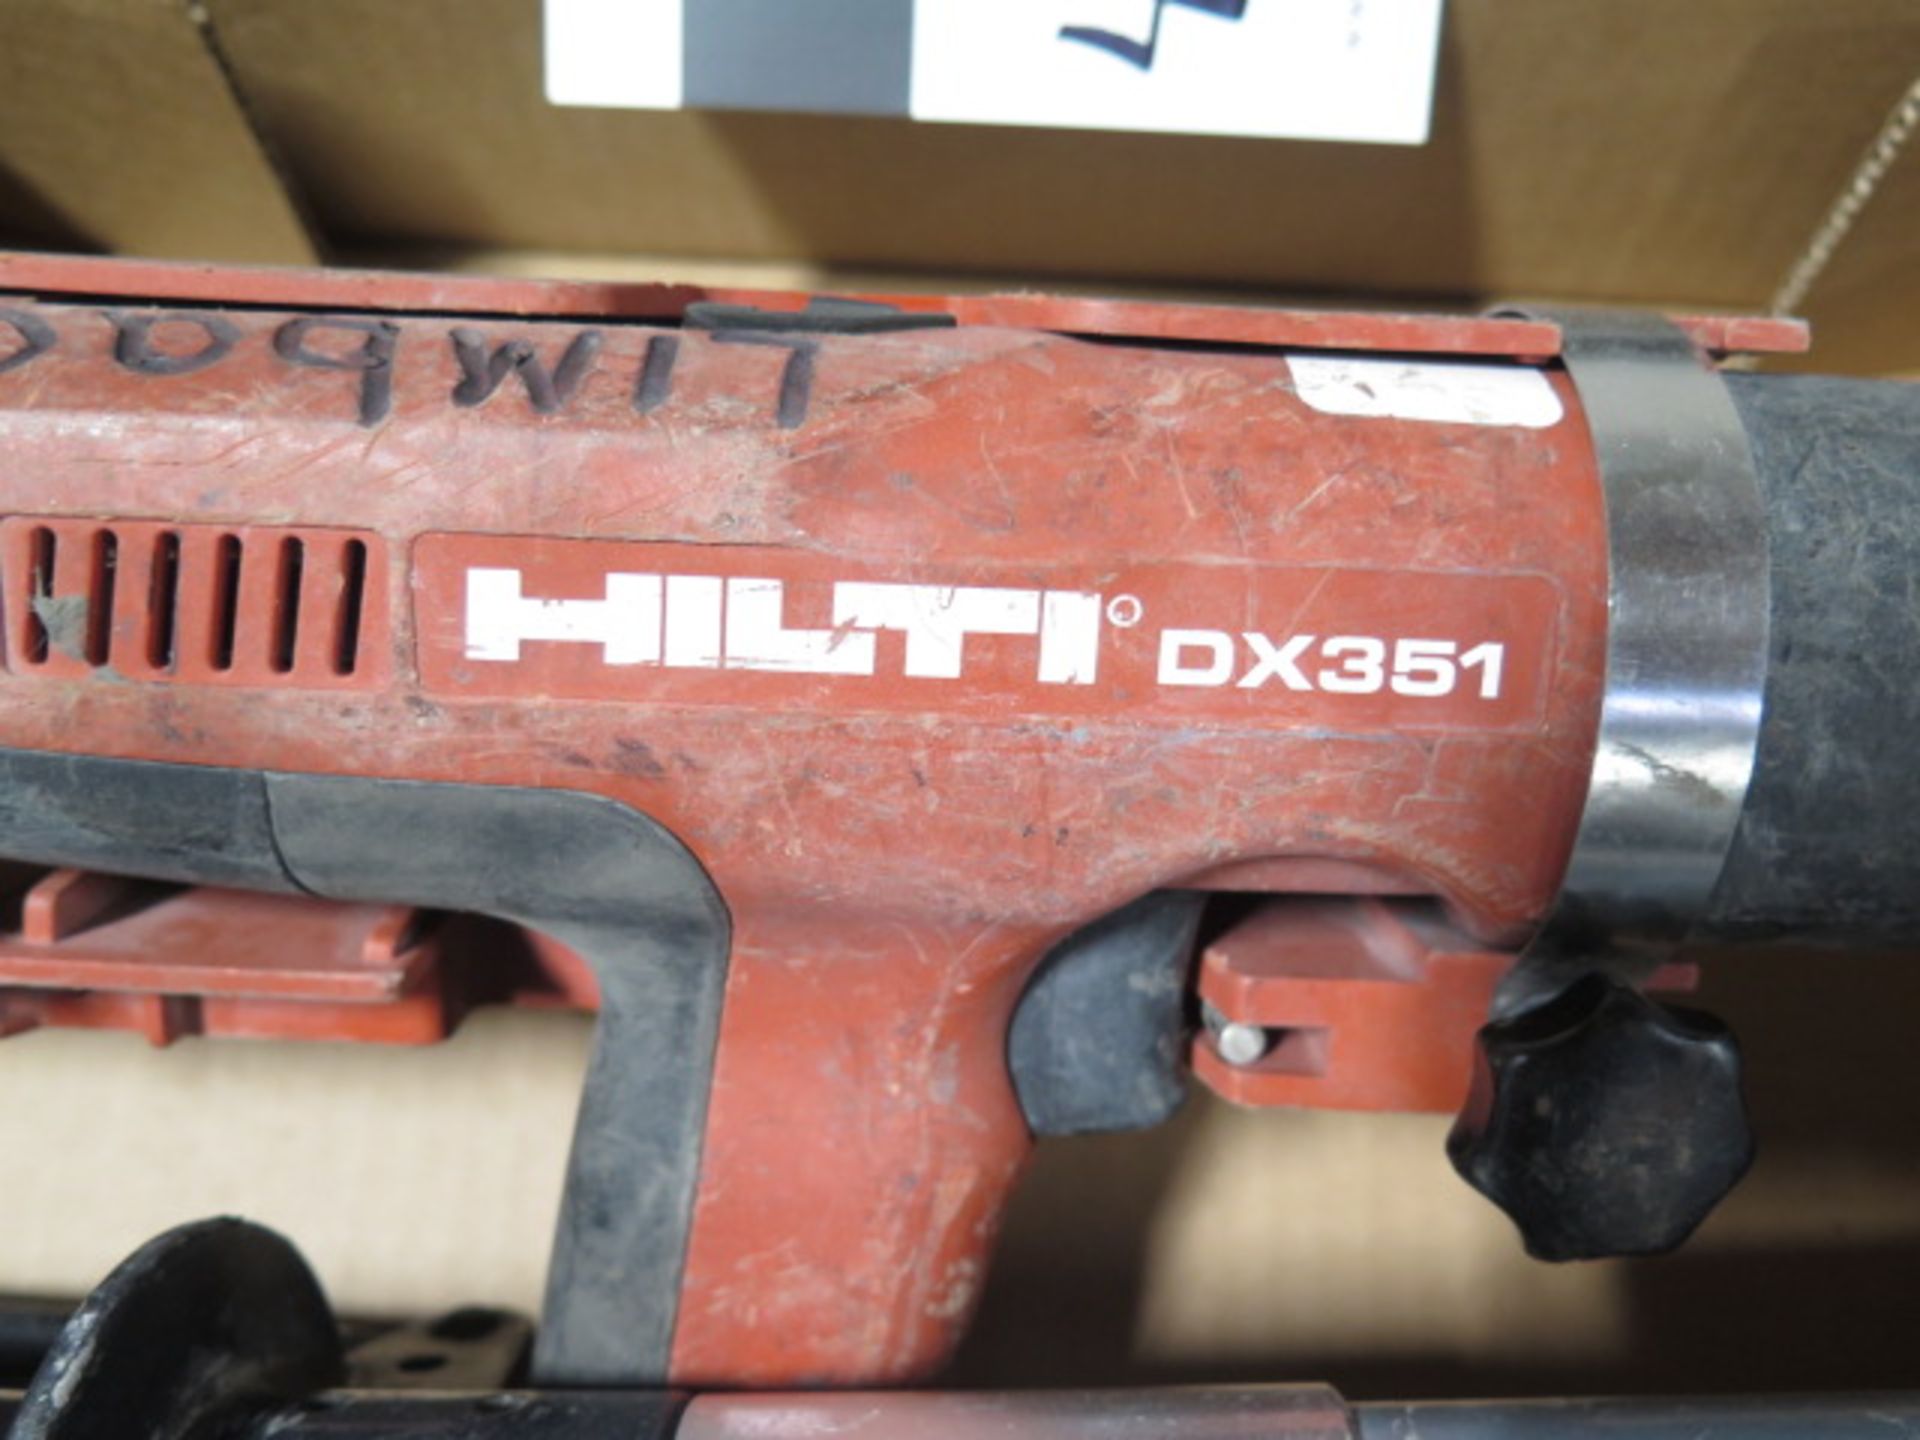 Hilti DX351 Powder Shot Tool w/ X-PT351 Extension Kit (SOLD AS-IS - NO WARRANTY) - Image 4 of 4